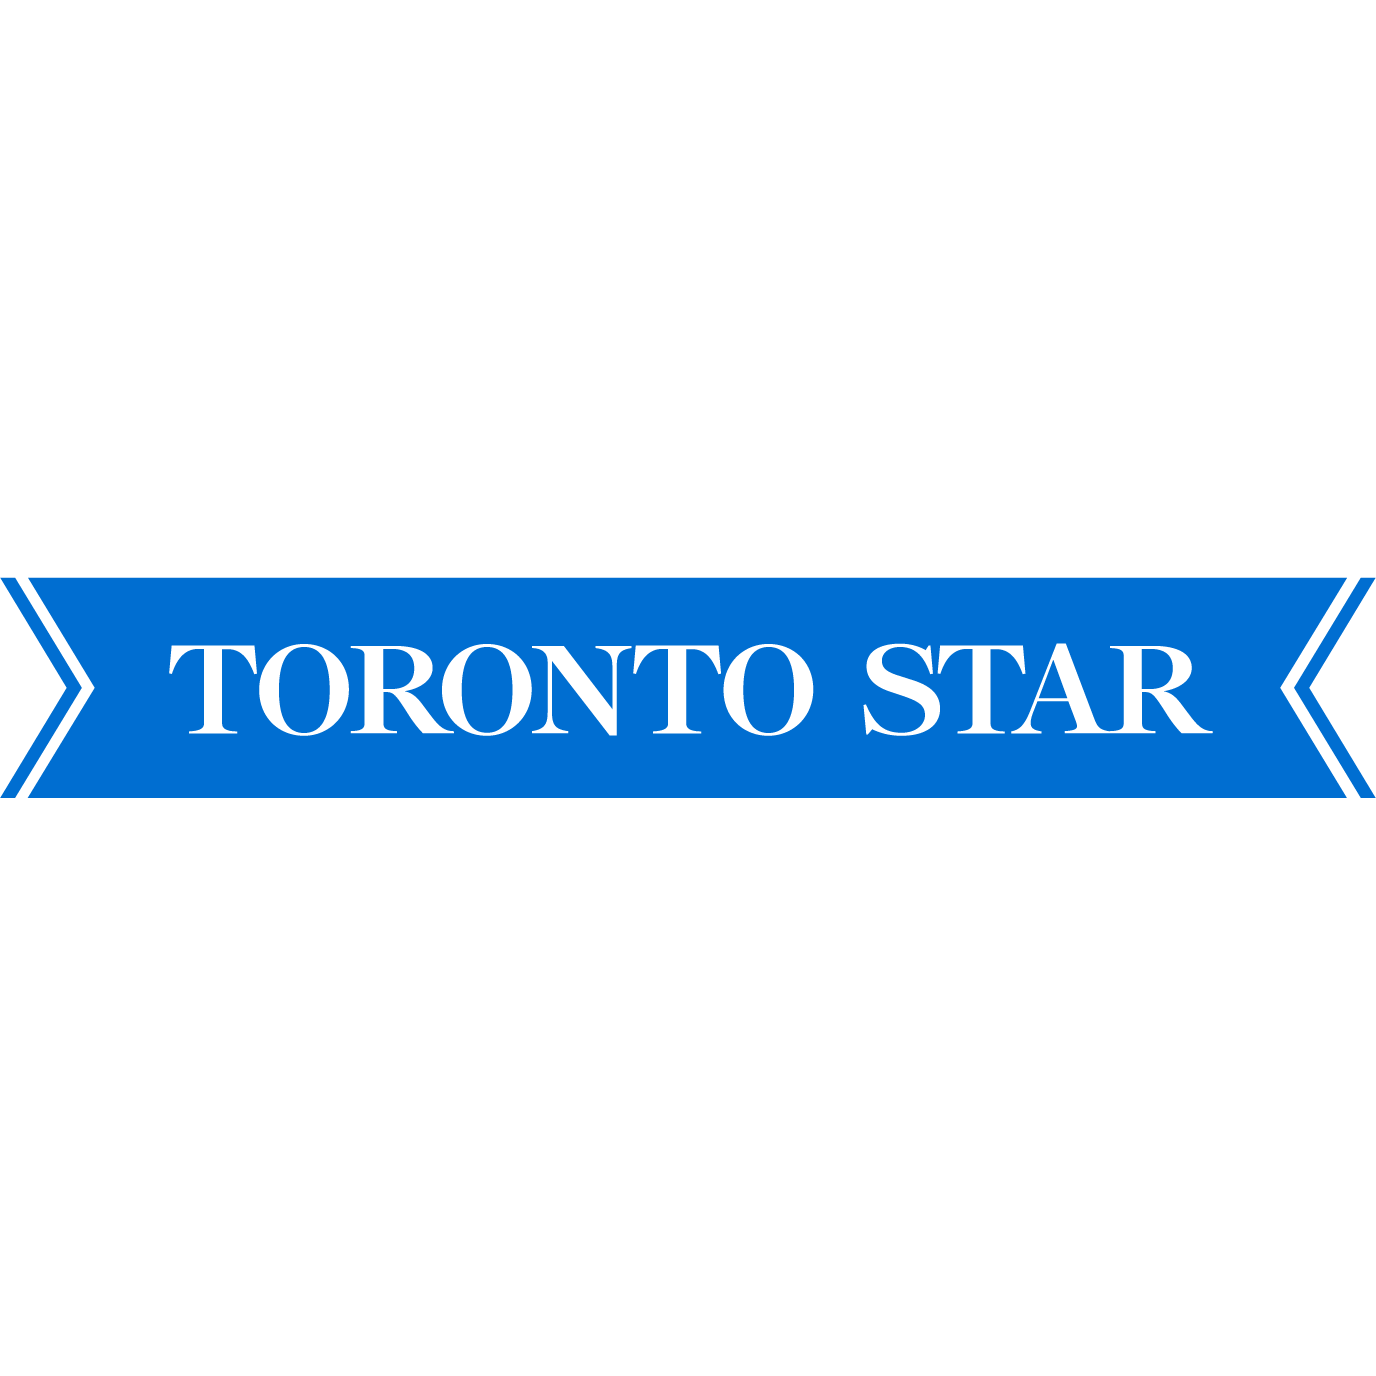 Toronto Star and Hivestack: drive up key brand metrics with a creative approach to programmatic digital out of home